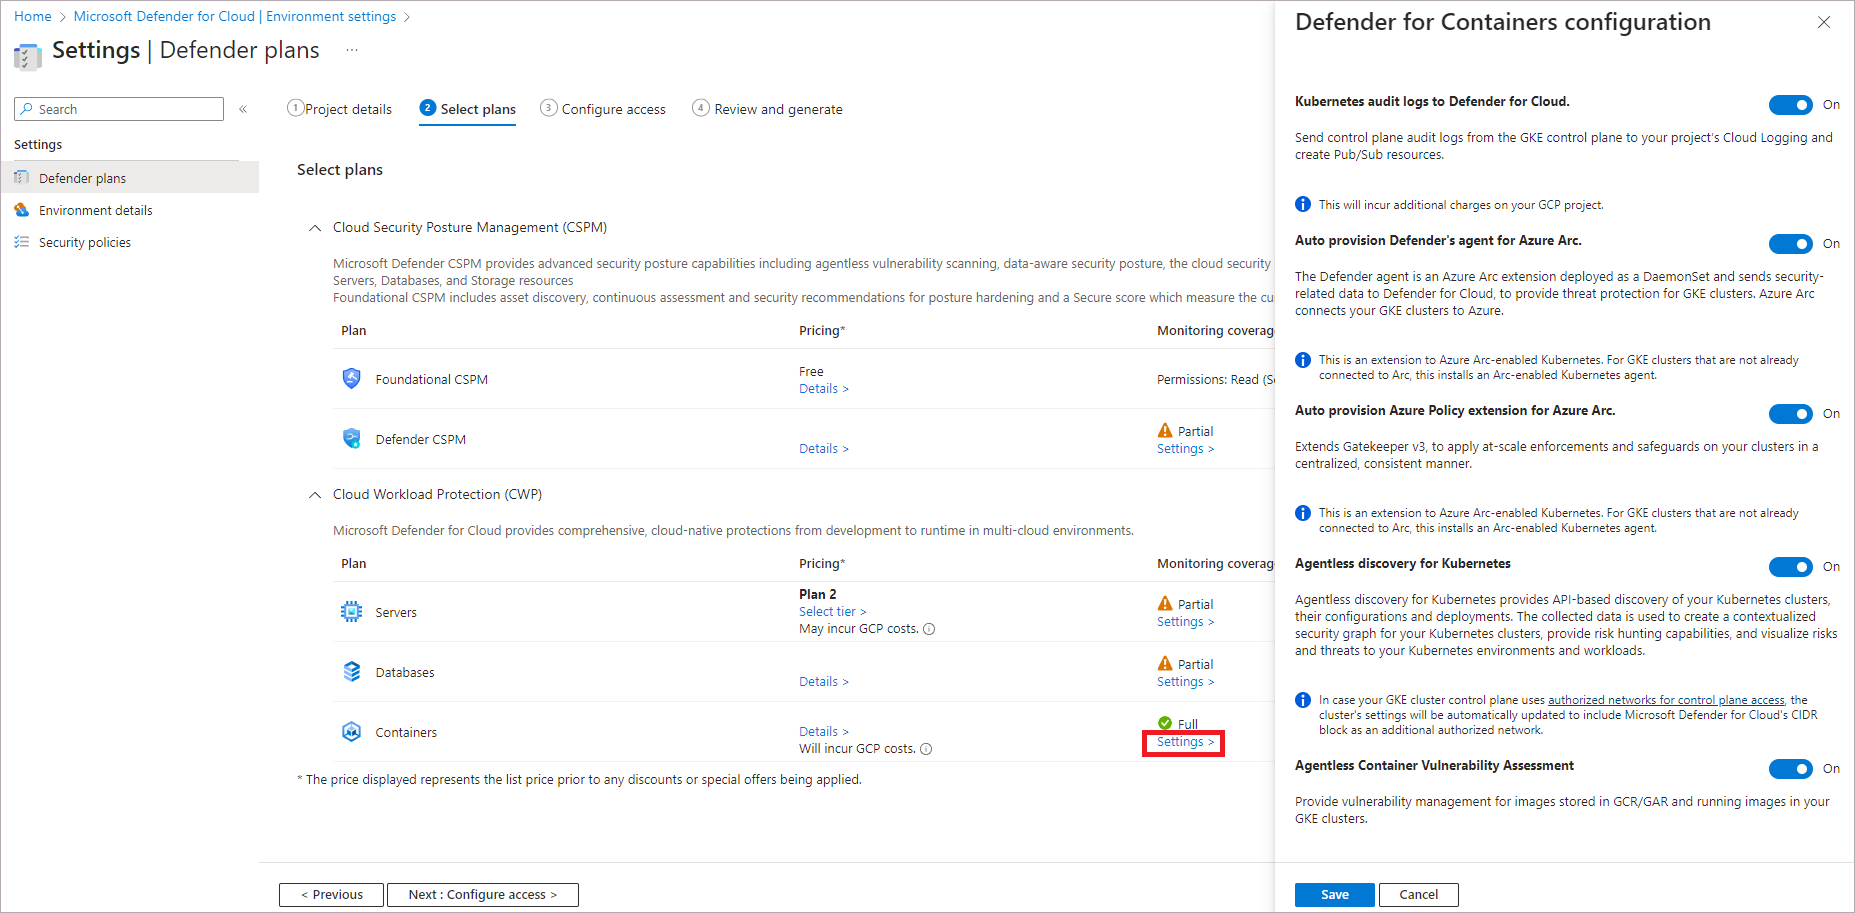 Screenshot of Defender for Cloud's environment settings page showing the settings for the Containers plan.